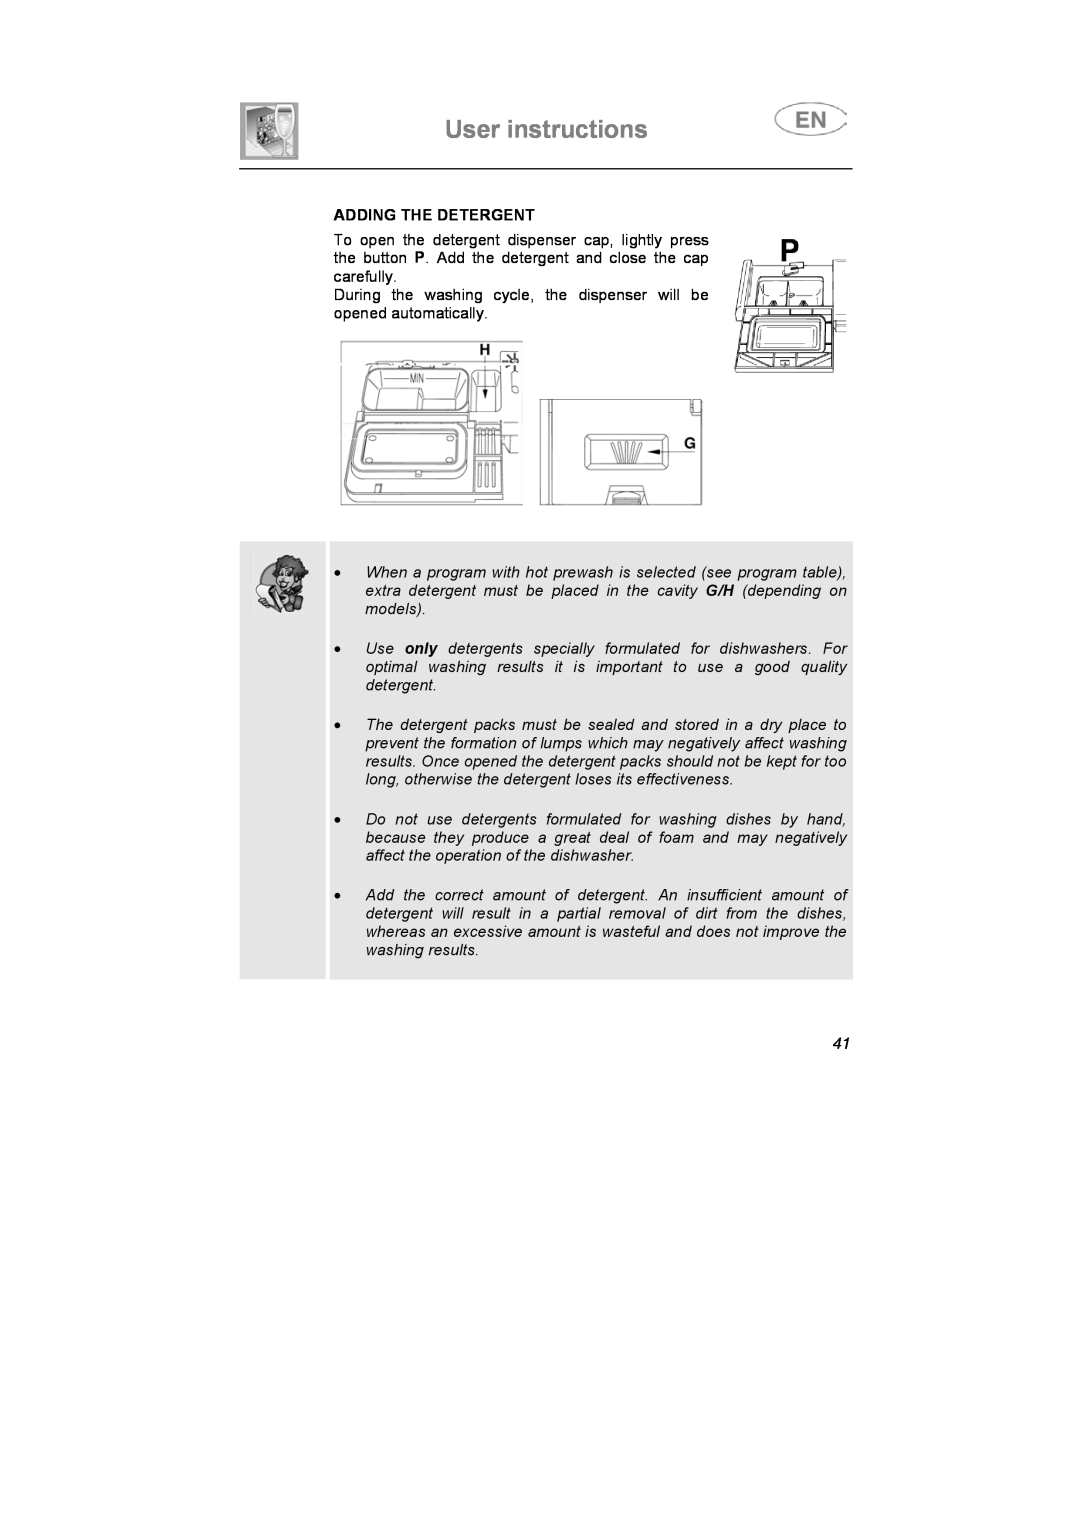 Smeg DD612S7 User instructions, Adding The Detergent, During the washing cycle, the dispenser will be opened automatically 